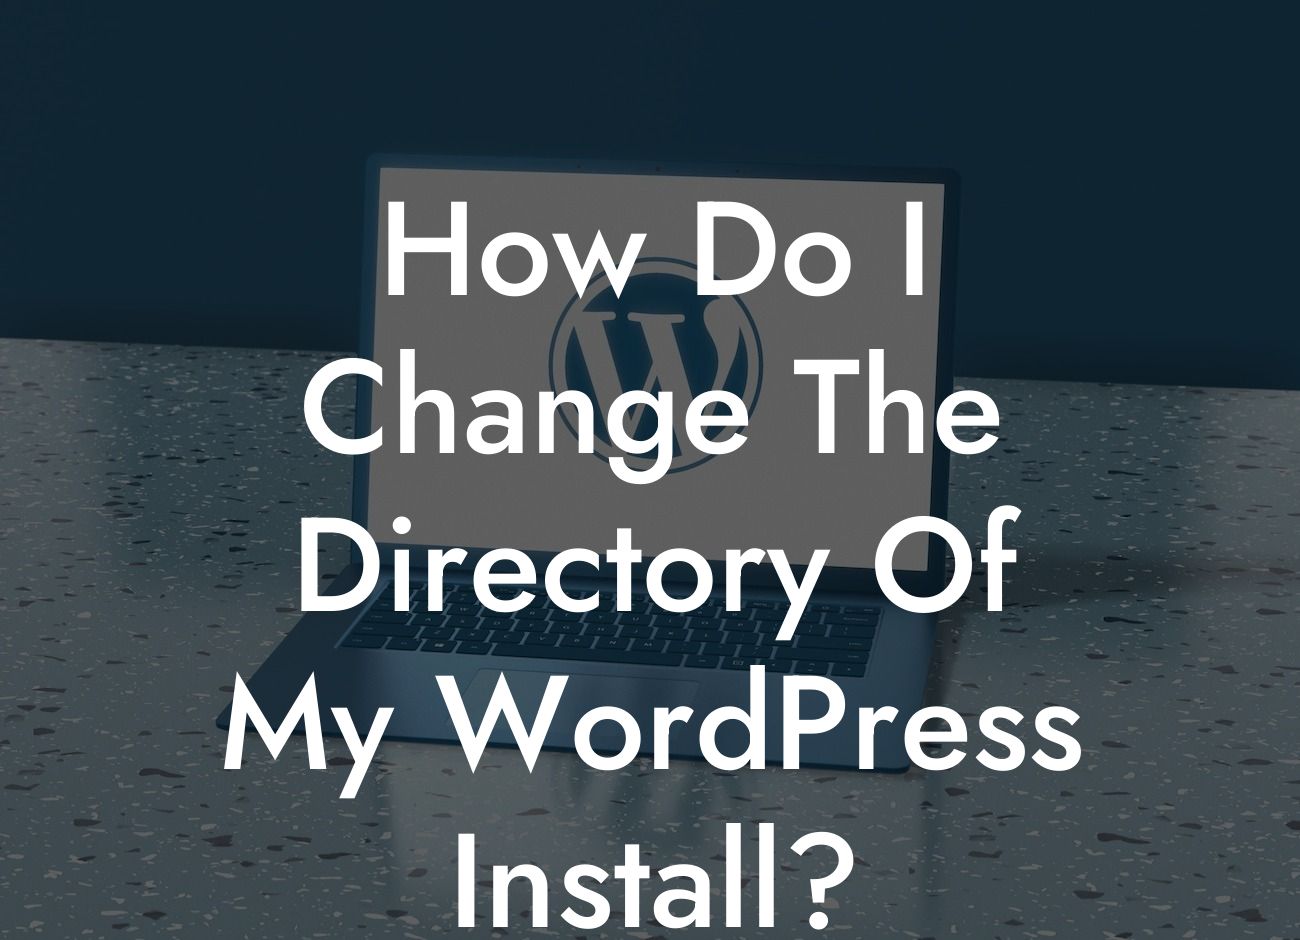 How Do I Change The Directory Of My WordPress Install?